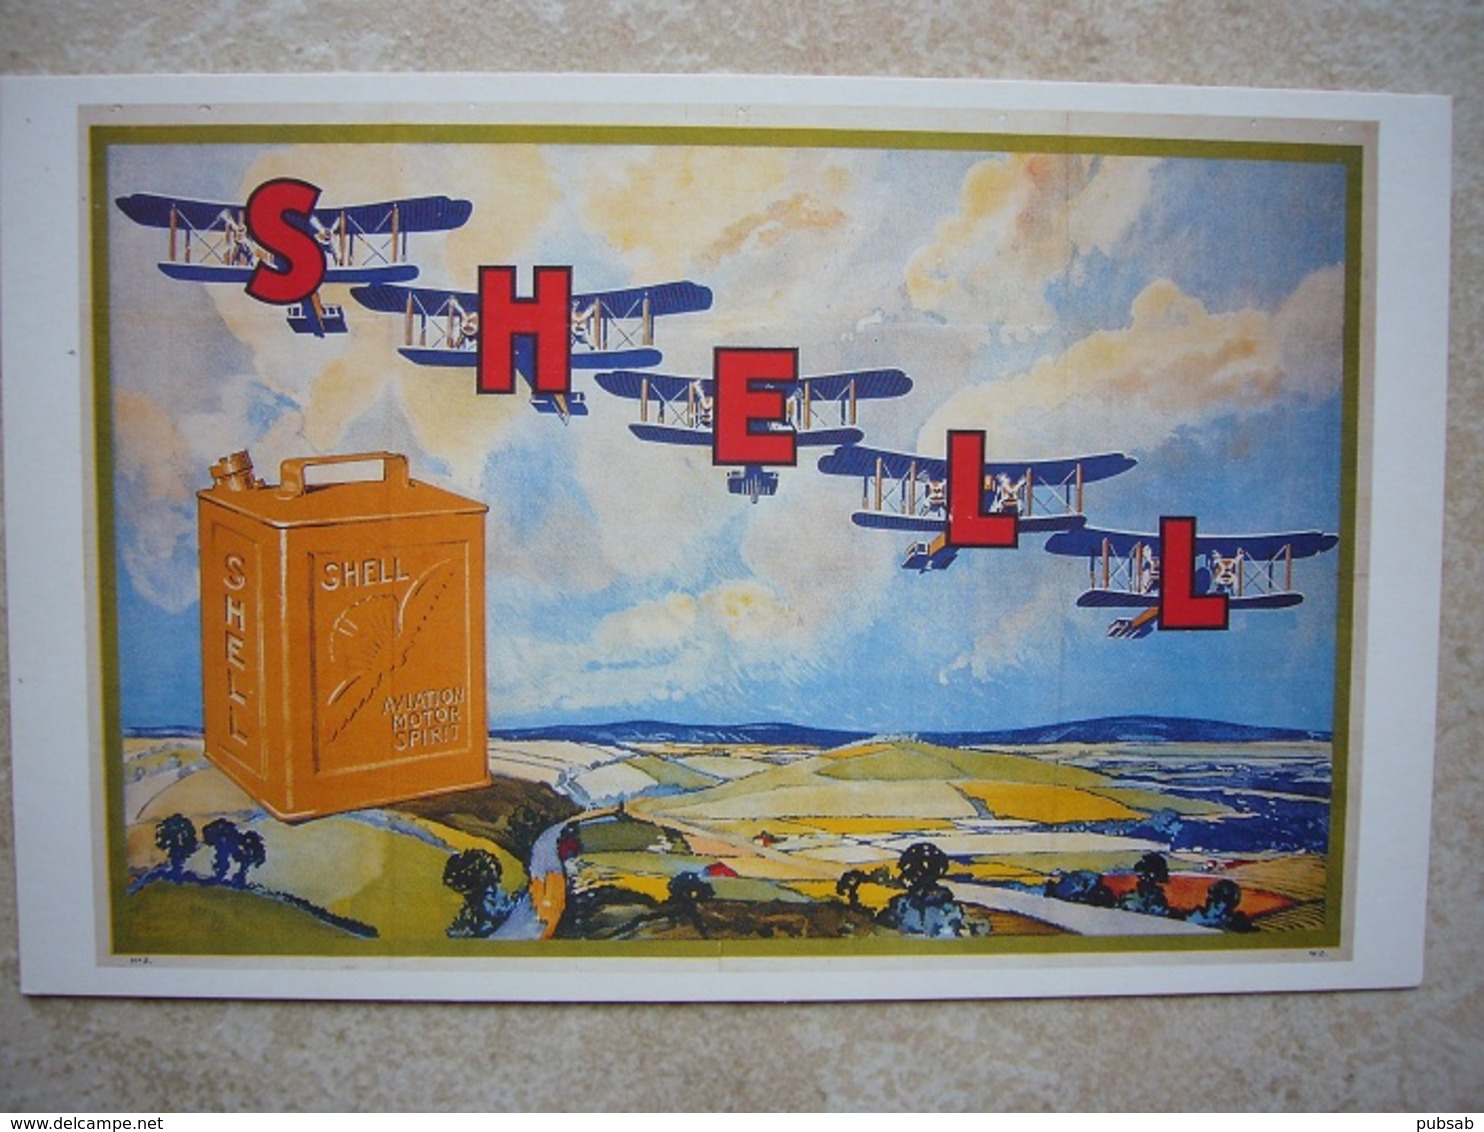 Avion / Airplane / IMPERIAL AIRWAYS / Handley Page W-8b / Reproductions From Original Shell Poster / 1994 - 1919-1938: Between Wars